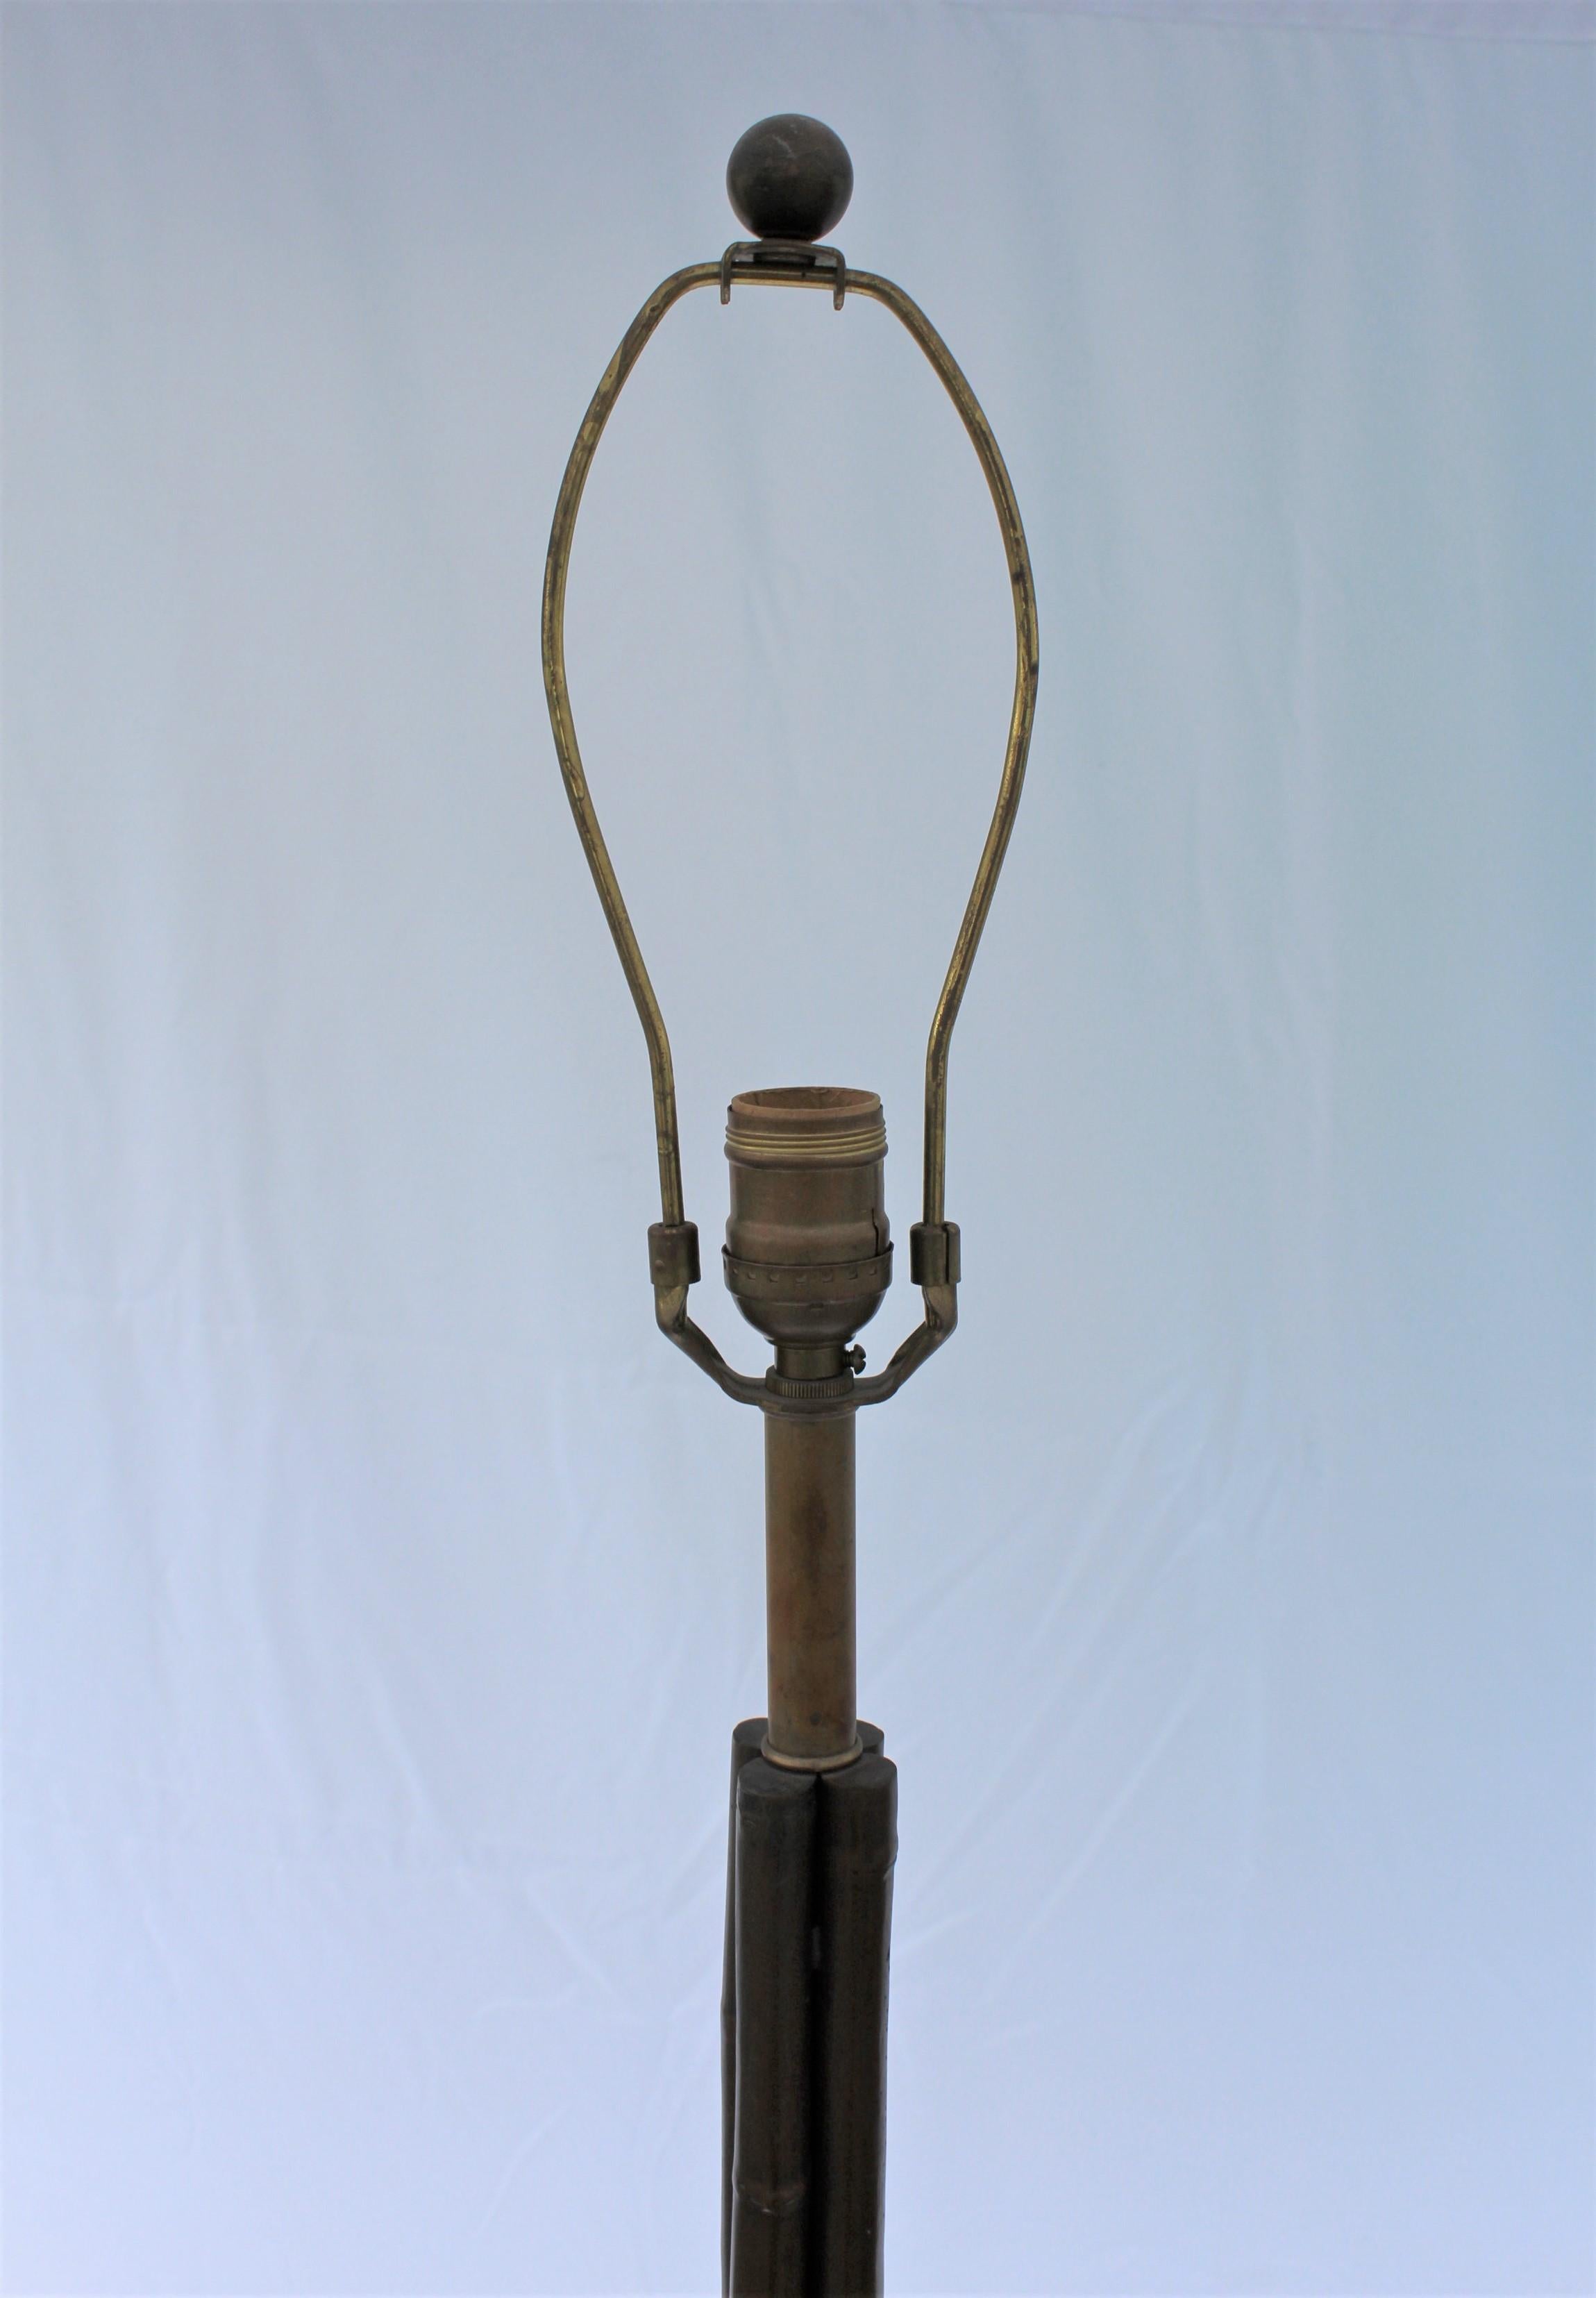 A four legged bronze bamboo design floor lamp. Has a single Edison socket and harp. Also with 4 ball feet pads. Good bronze acid patina. Measures: 69